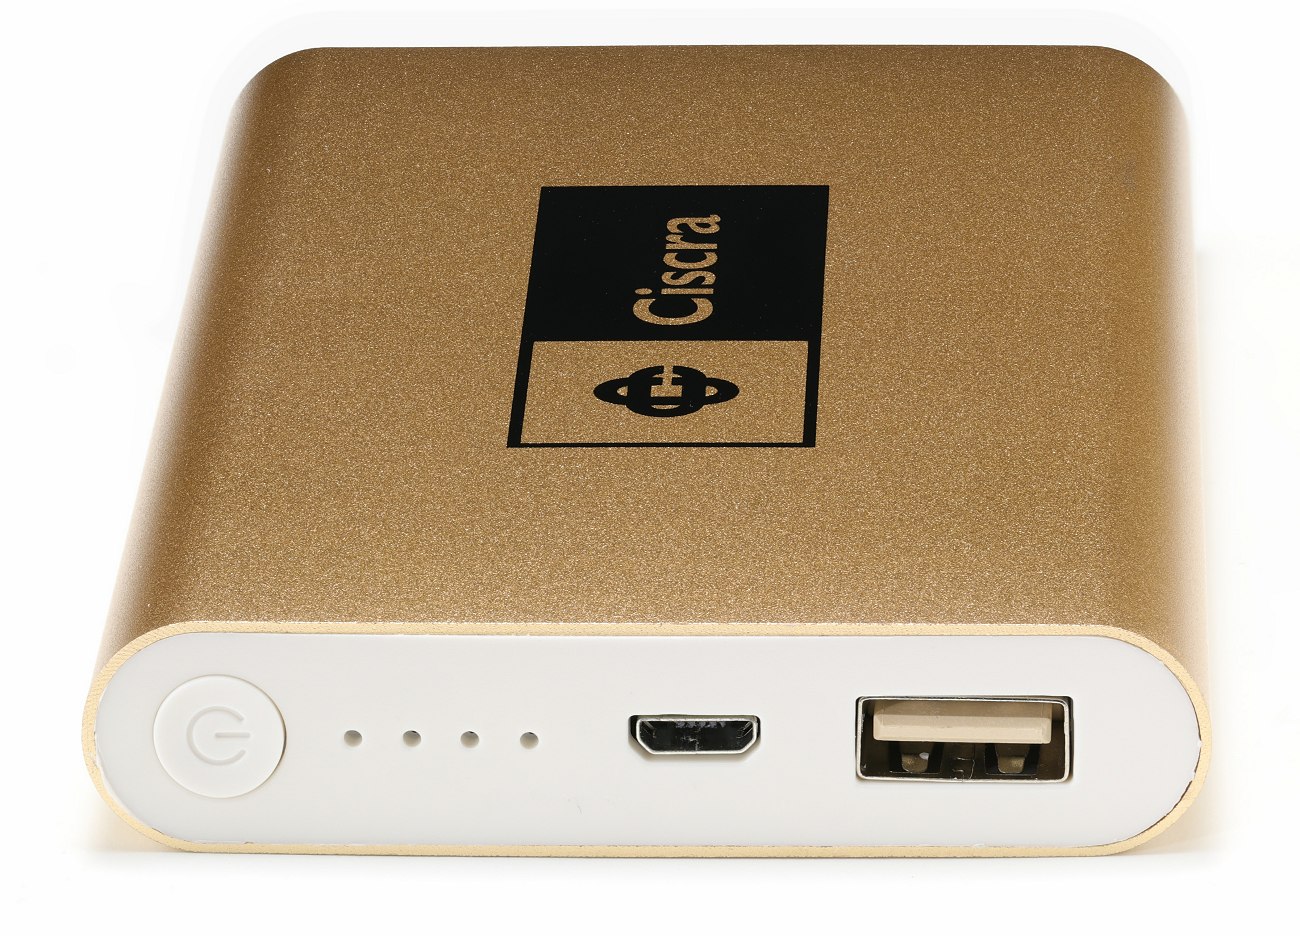 A large flat power bank with a gold coloured metal casing and black printed logo branding